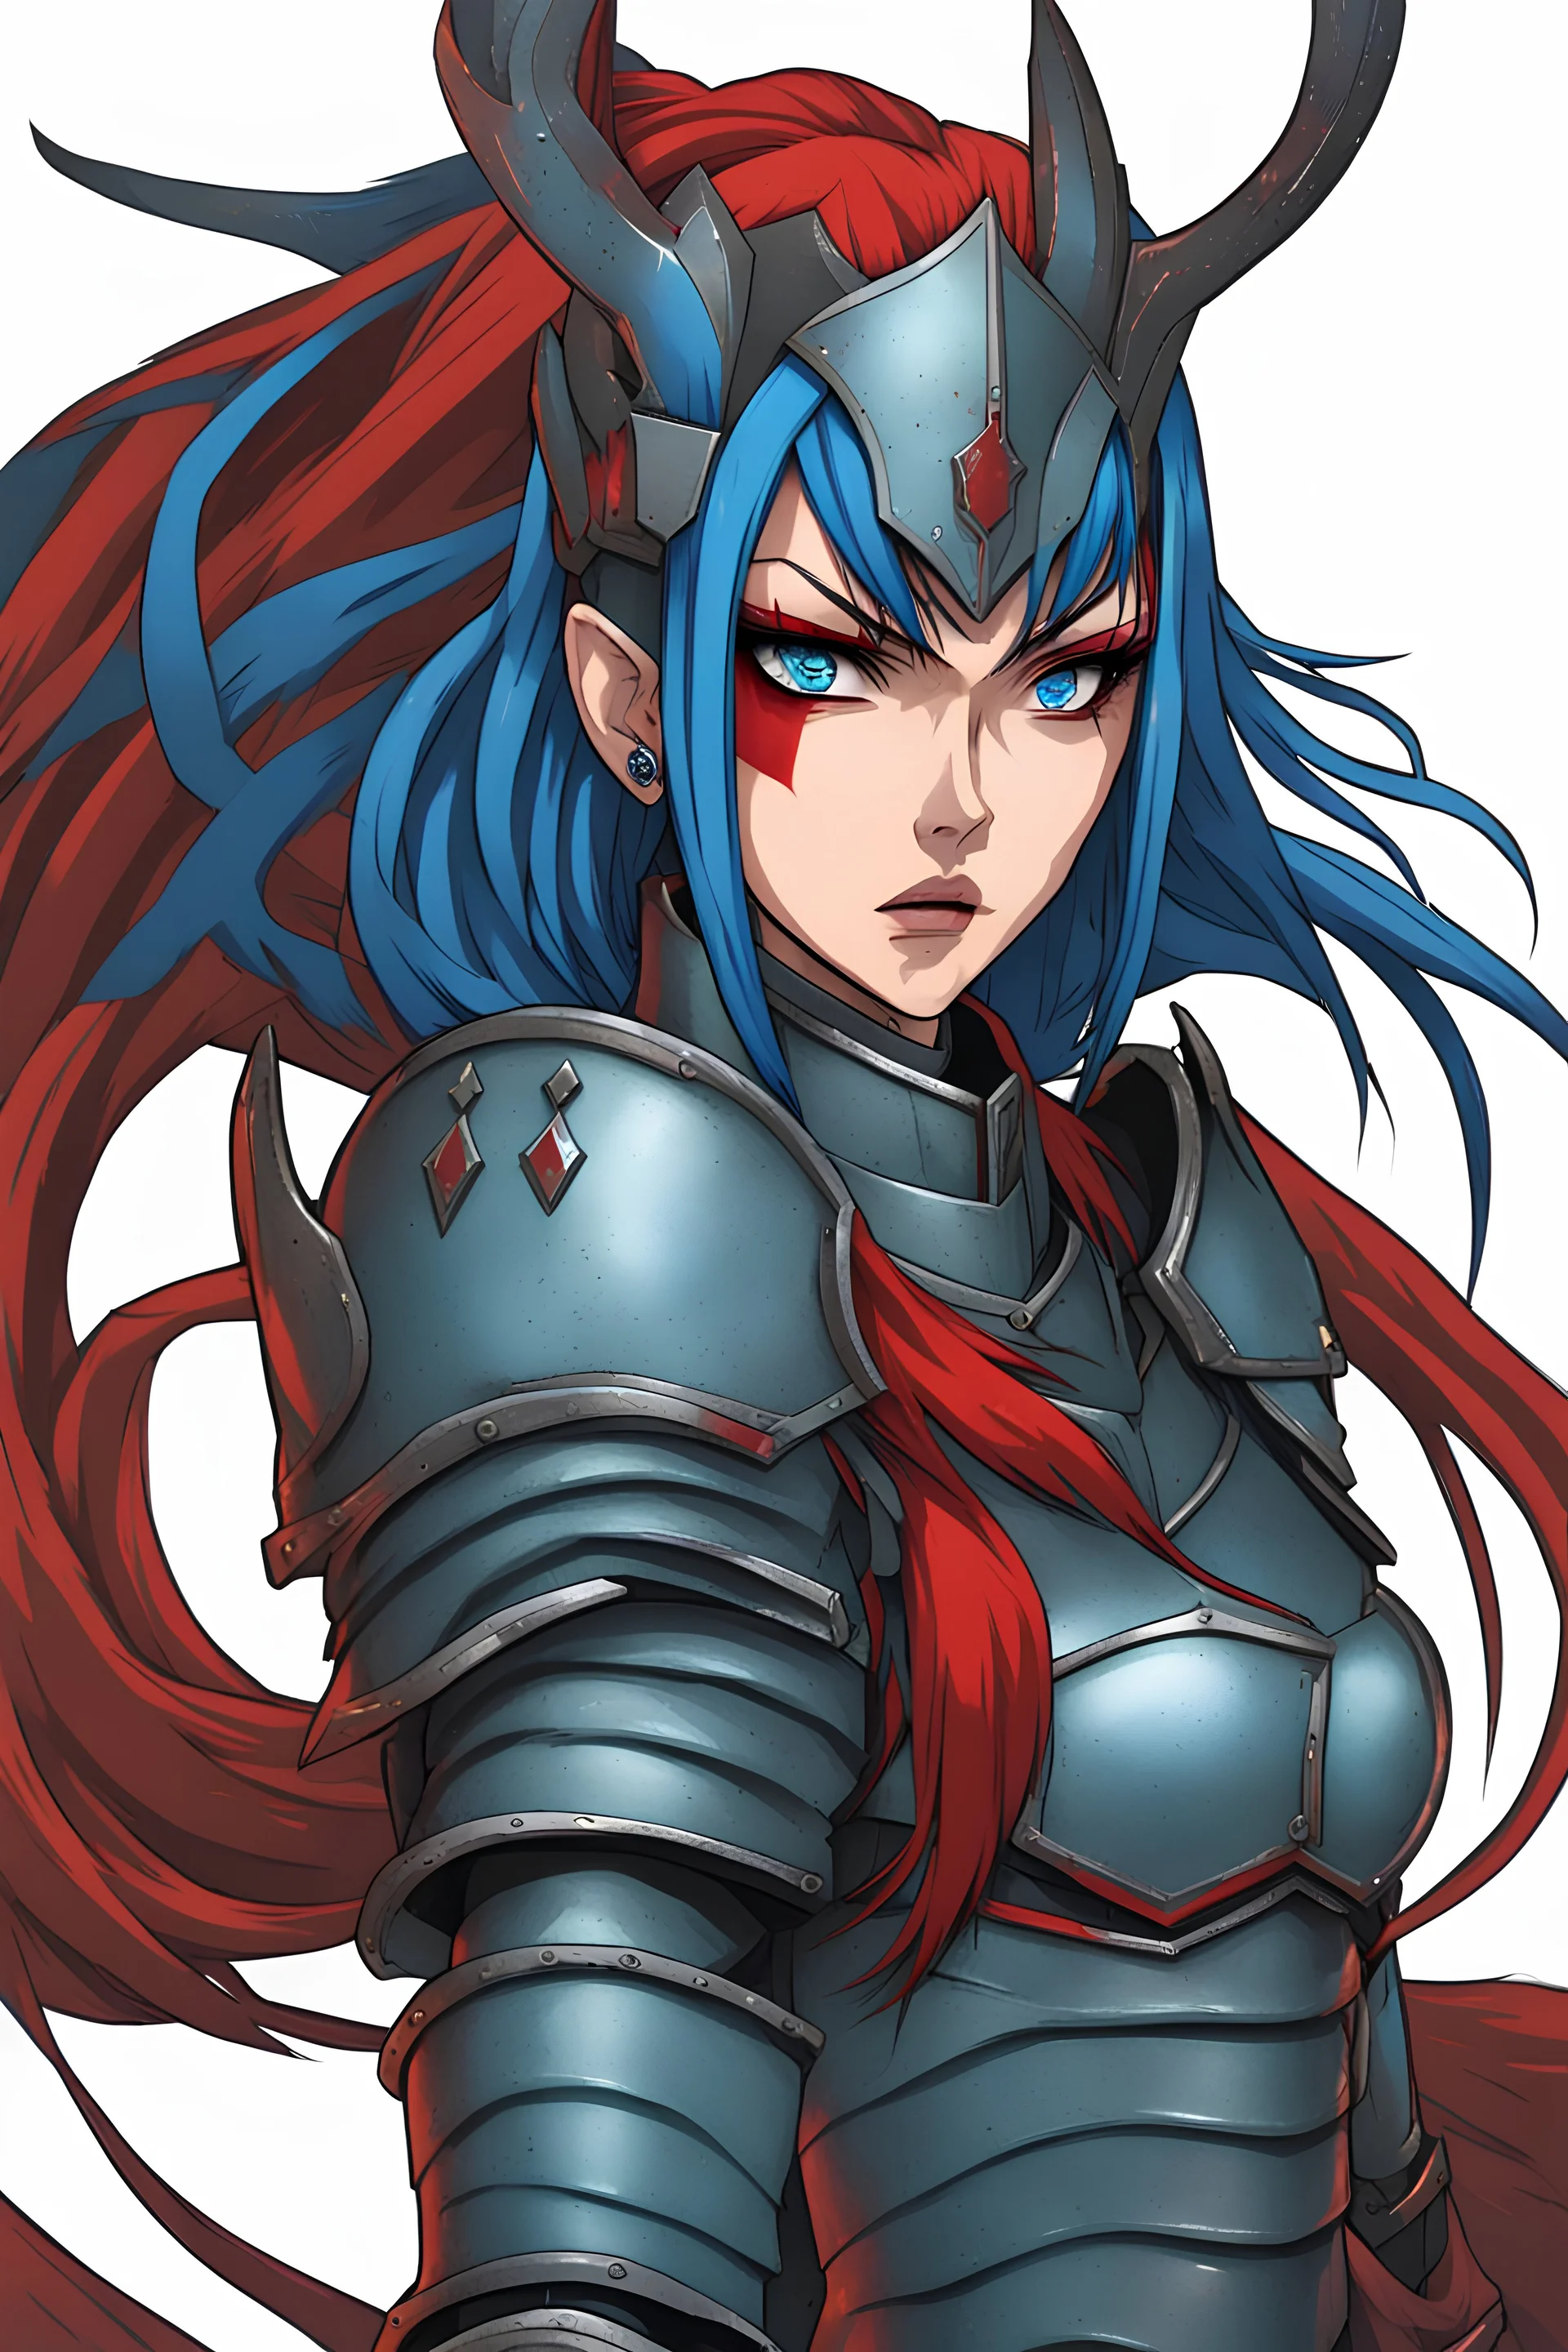 a beautiful woman wearing medieval armor, looking at the camera, angry, blue eyes, blue hair, gray and red armor, anime artstyle, close up on face, blood on his face, longe hair, furious expression, kazuma kaneko art, Hiroya Oku art, shadow, darkness